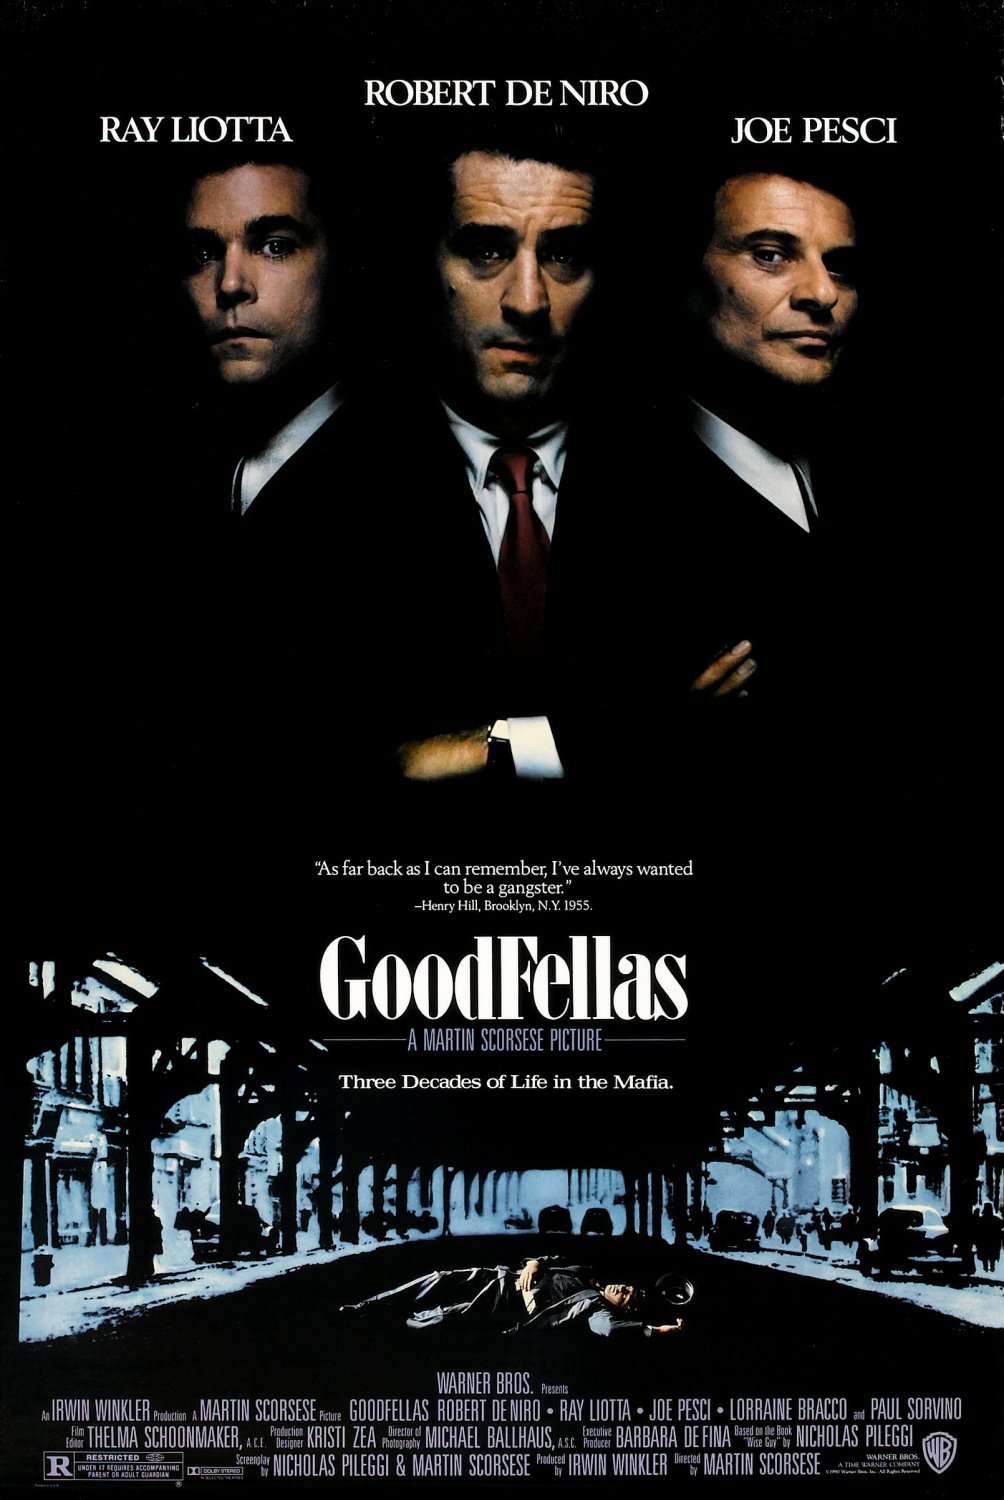 On this day in 1990, The movie, Goodfellas, is released in theaters.